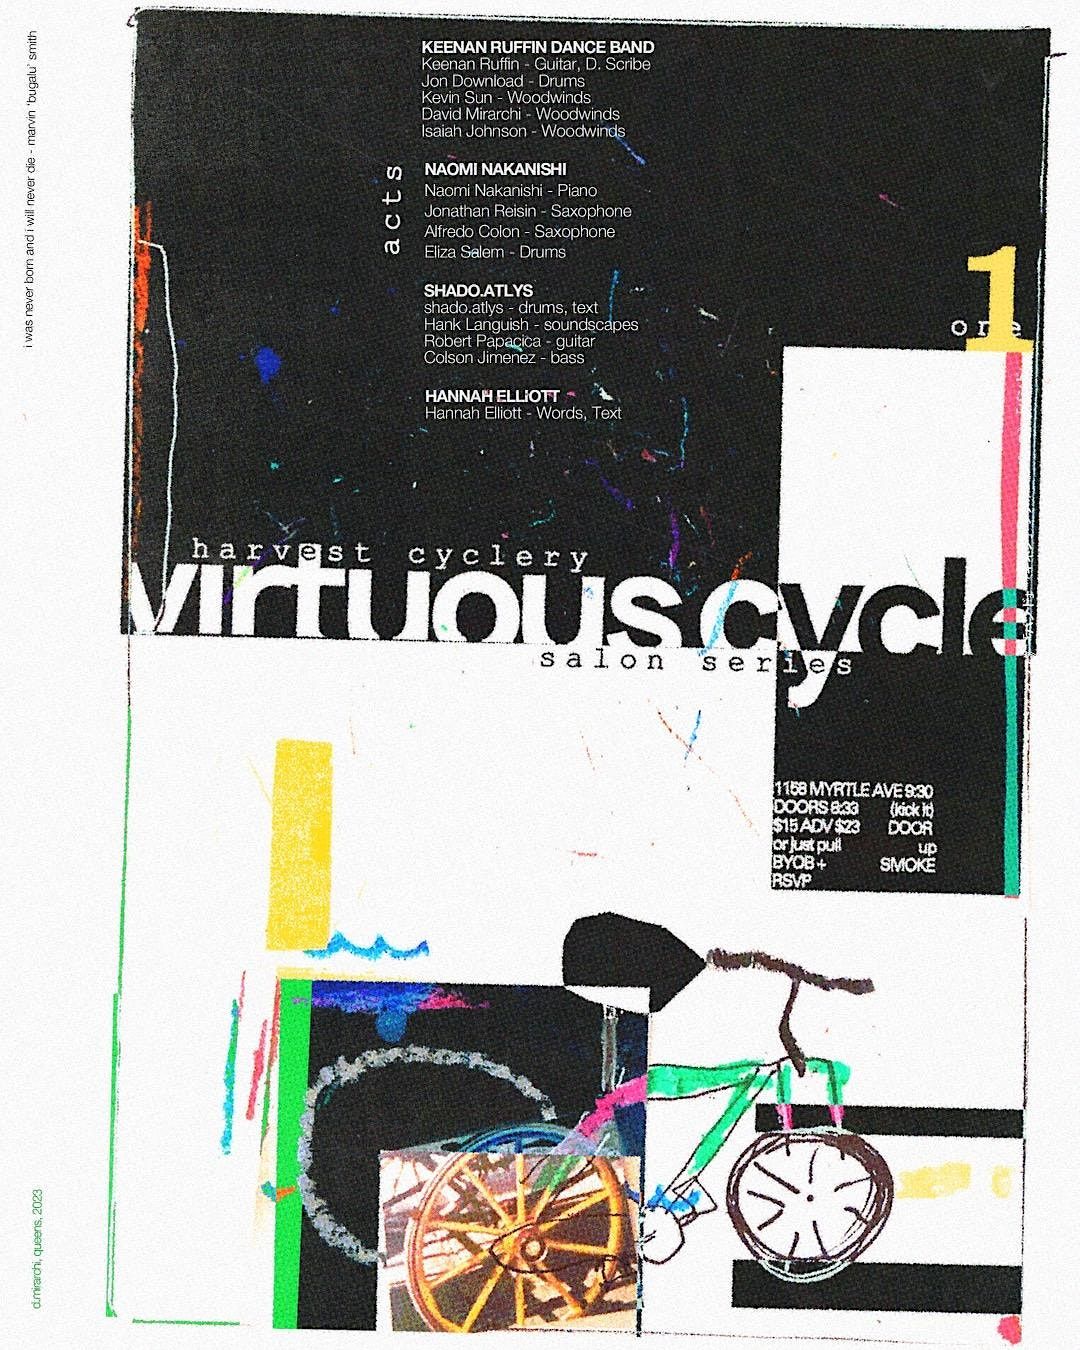 HARVEST CYCLERY VIRTUOUS CYCLE SALON SERIES #1